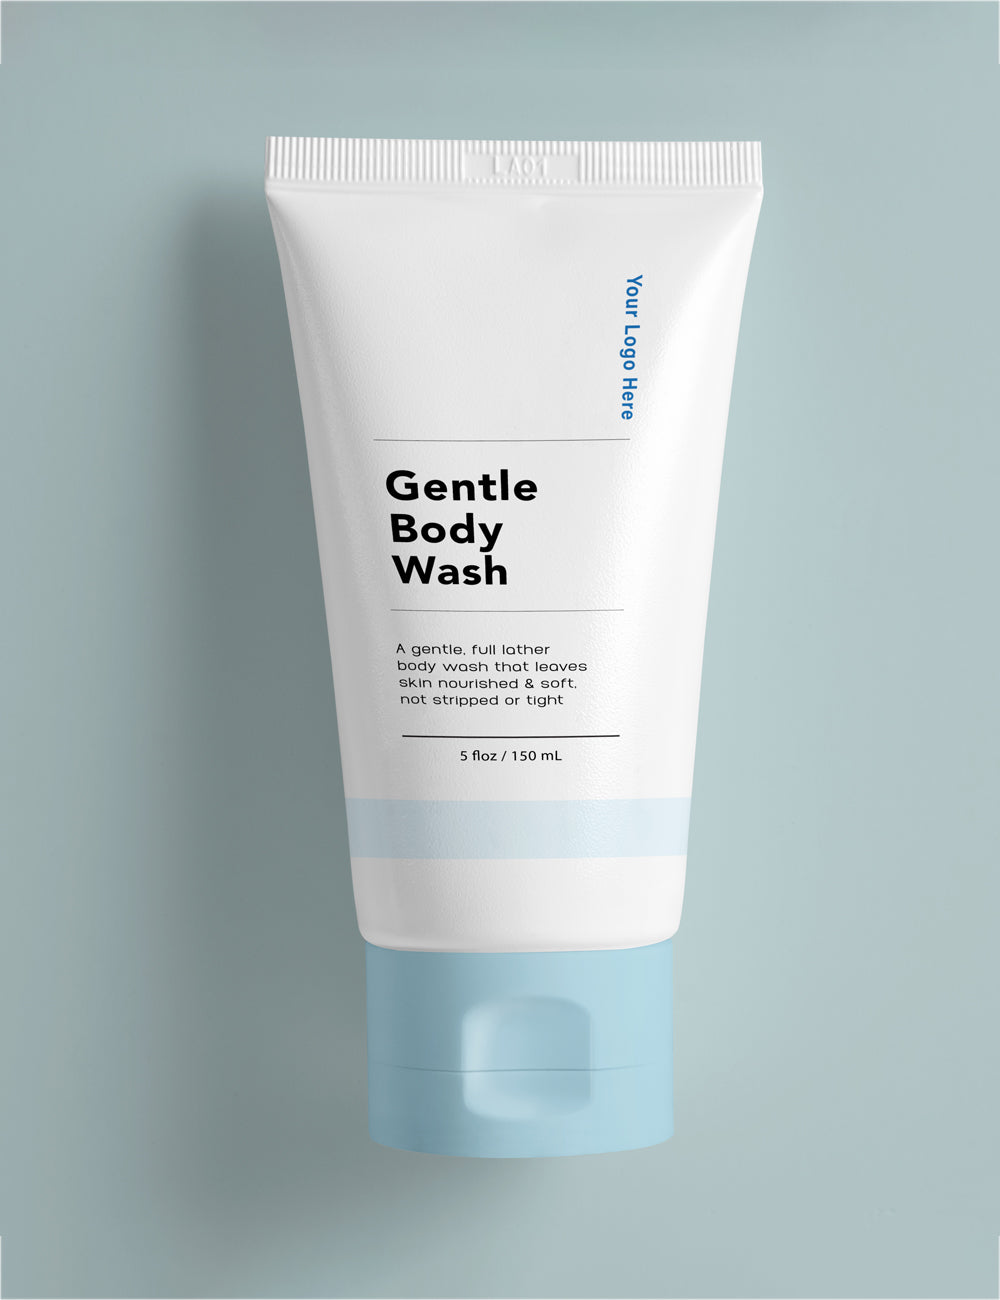 Minimal Distractions beauty packaging white and blue tube design